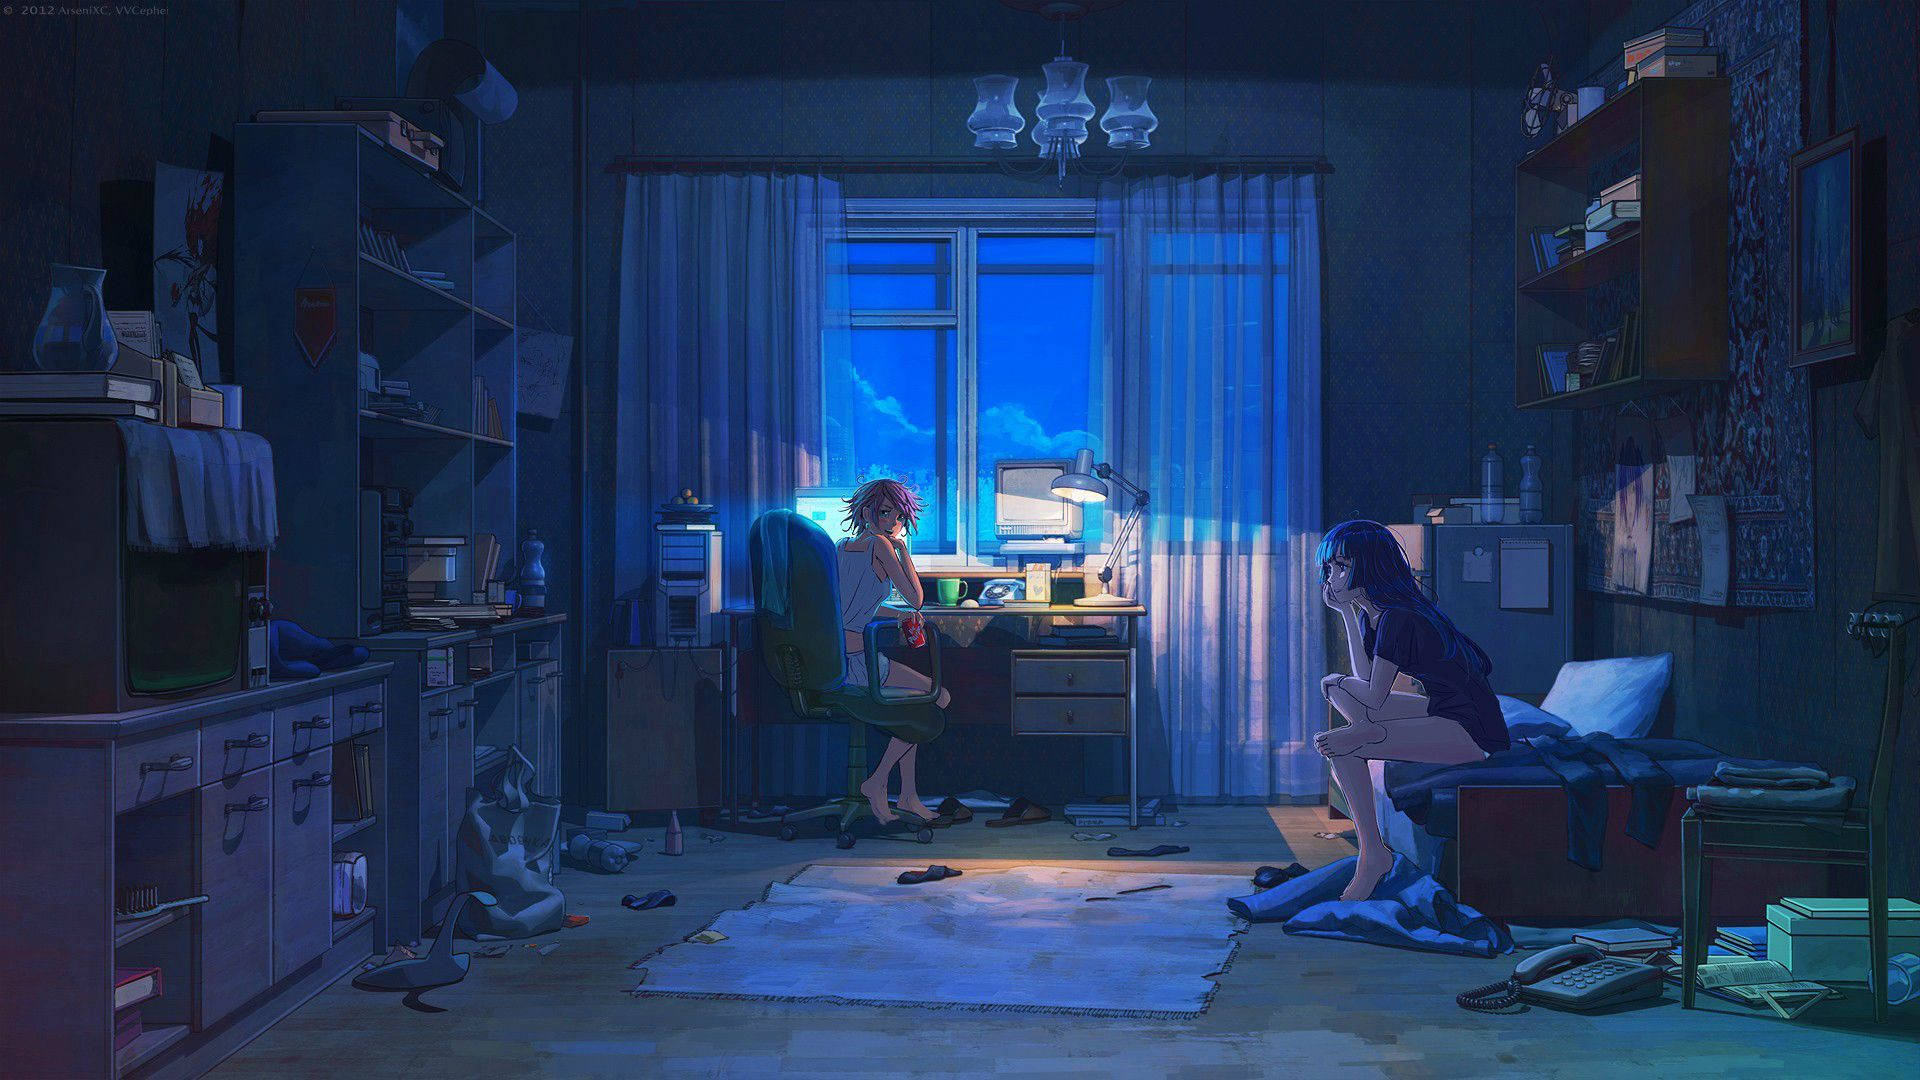 Anime Aesthetic Couple In Room For Computer Wallpaper